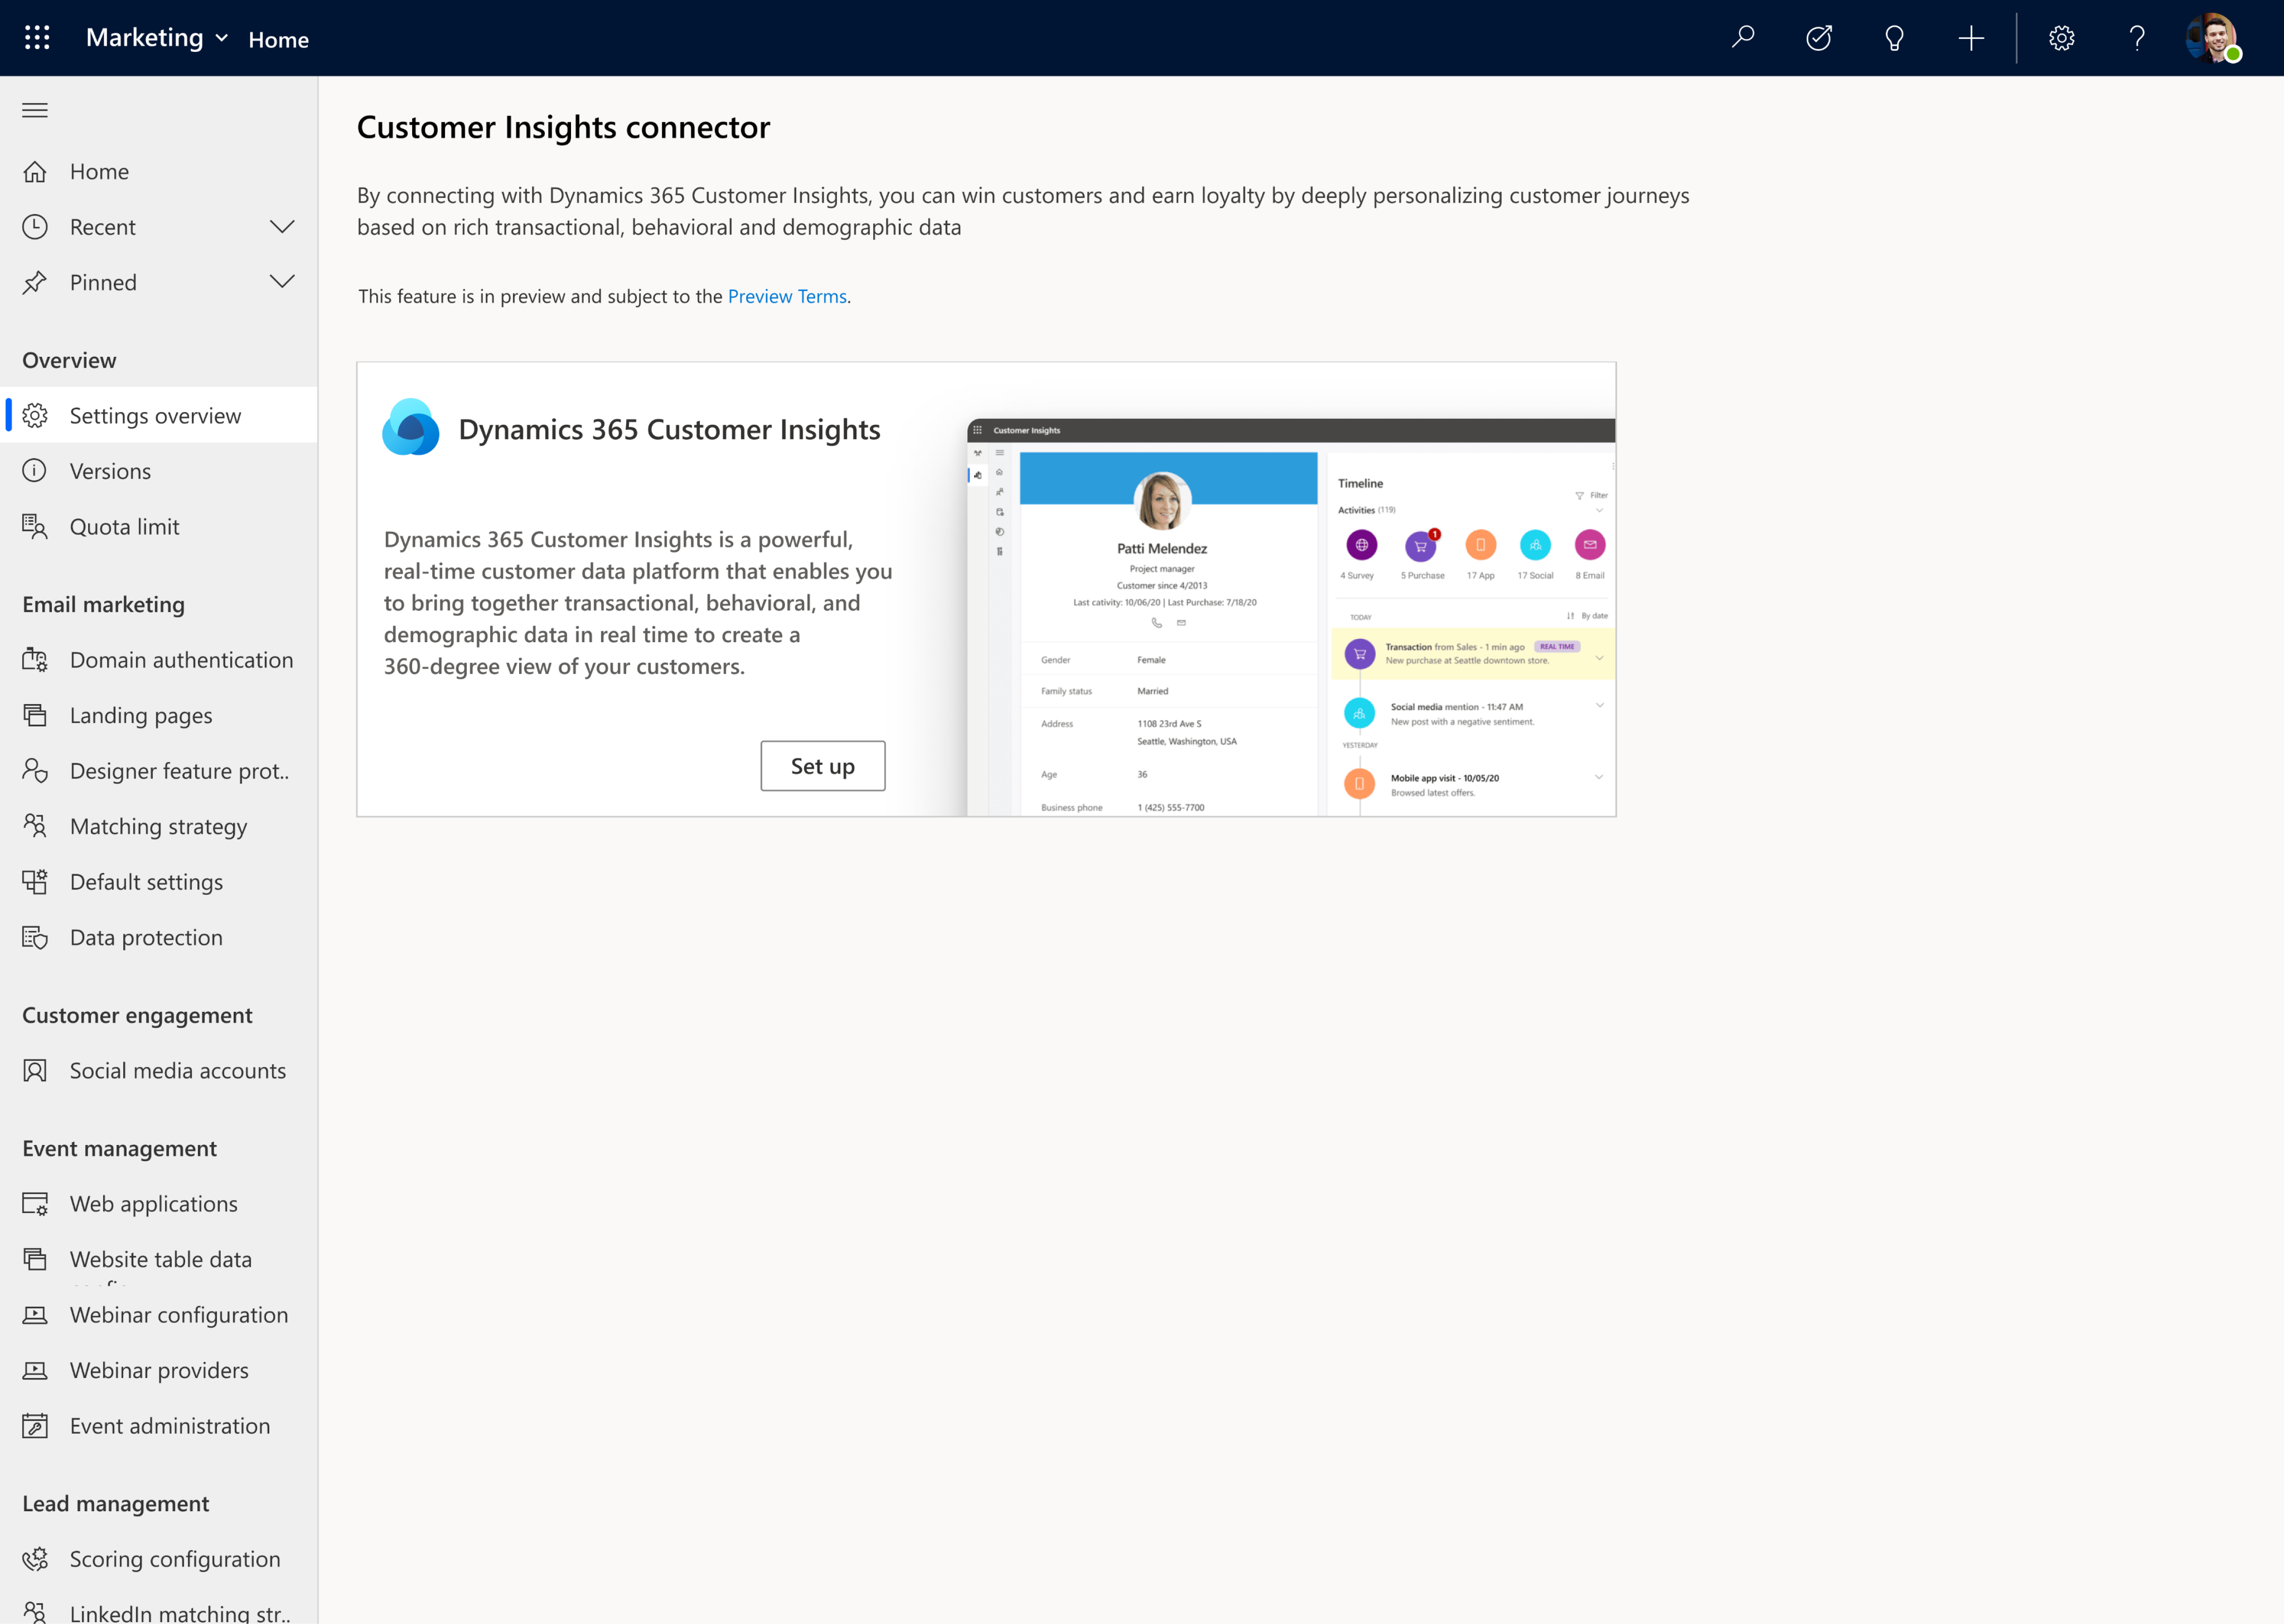 From Dynamics 365 Marketing you can seamlessly connect with Dynamics Customer Insights and use that profile and segment data to fine tune your journeys.